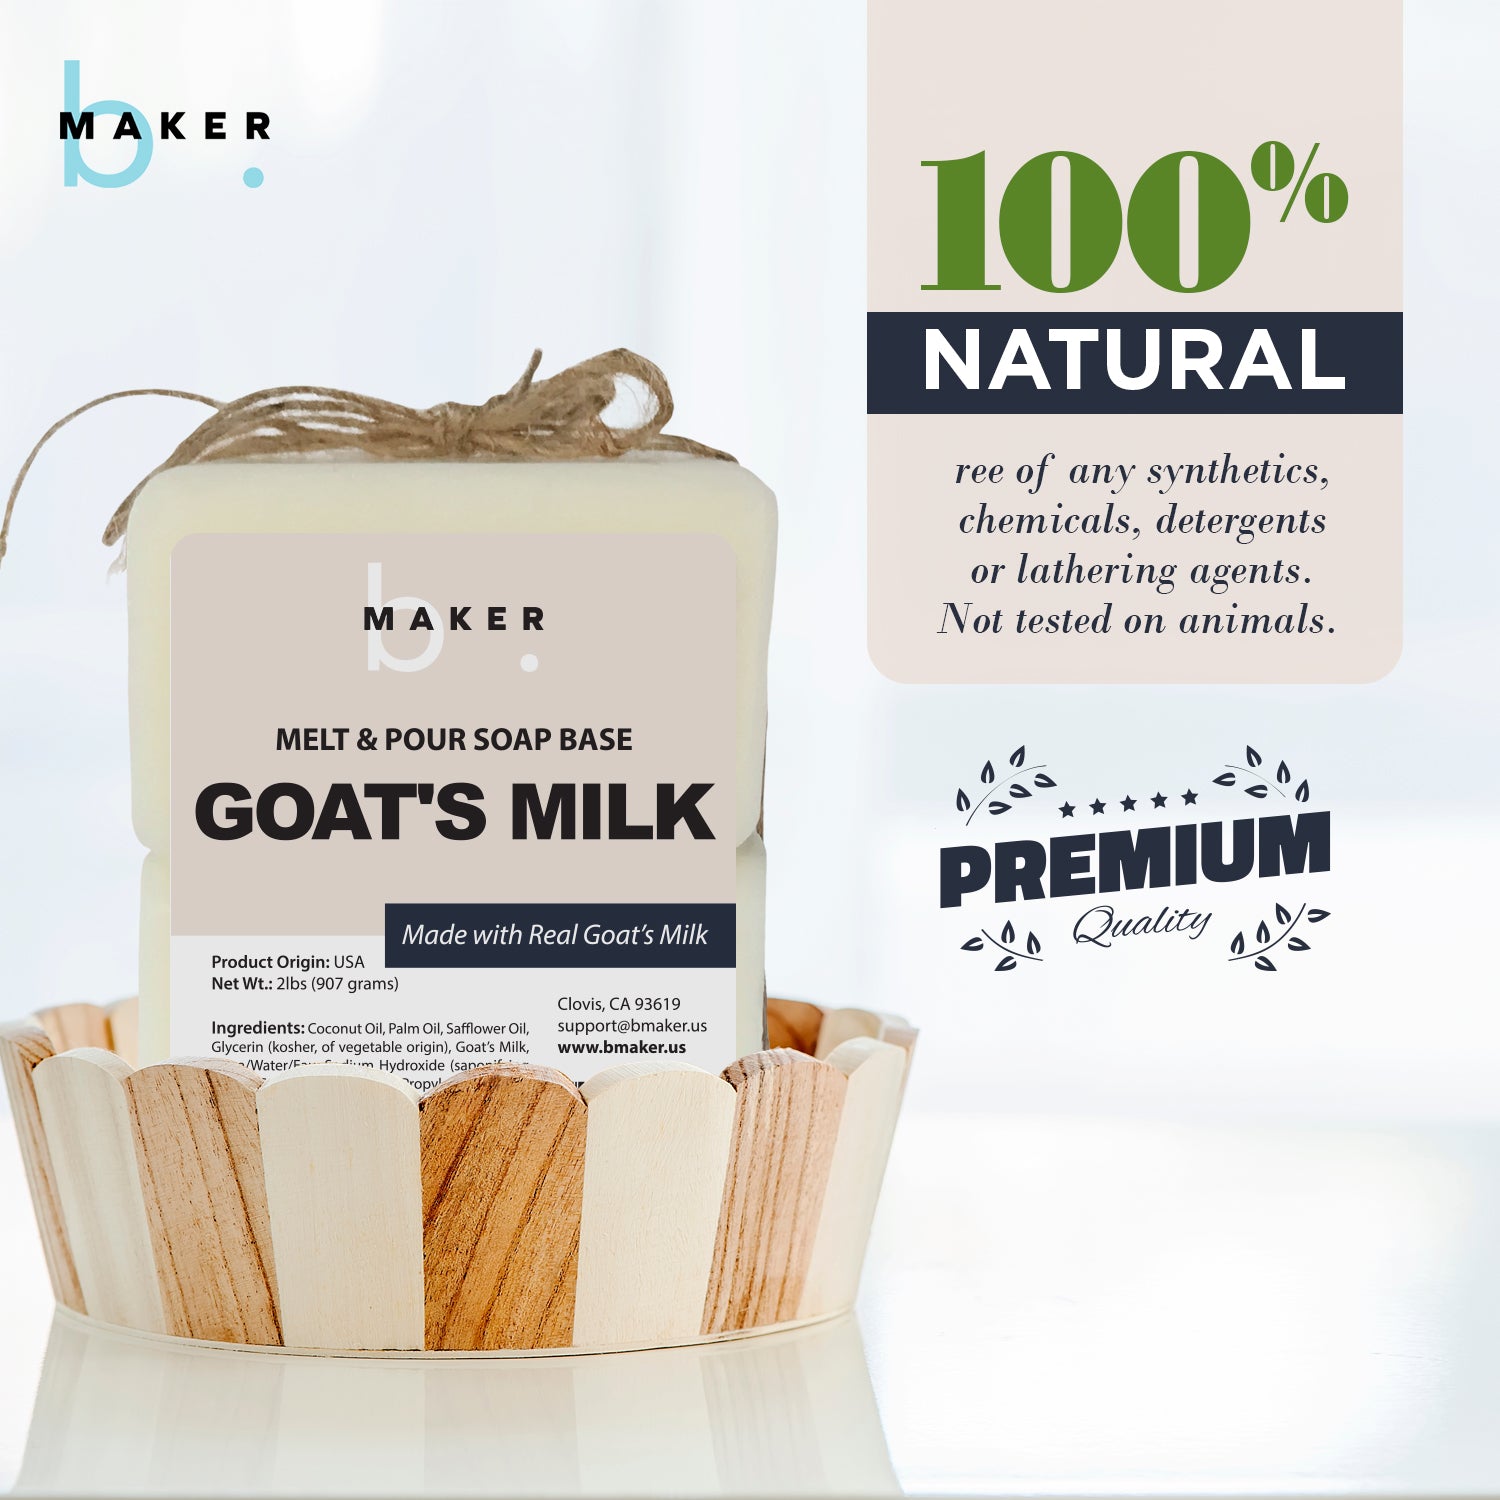 15 Melt and Pour Goat's Milk Soap – Bath and Body